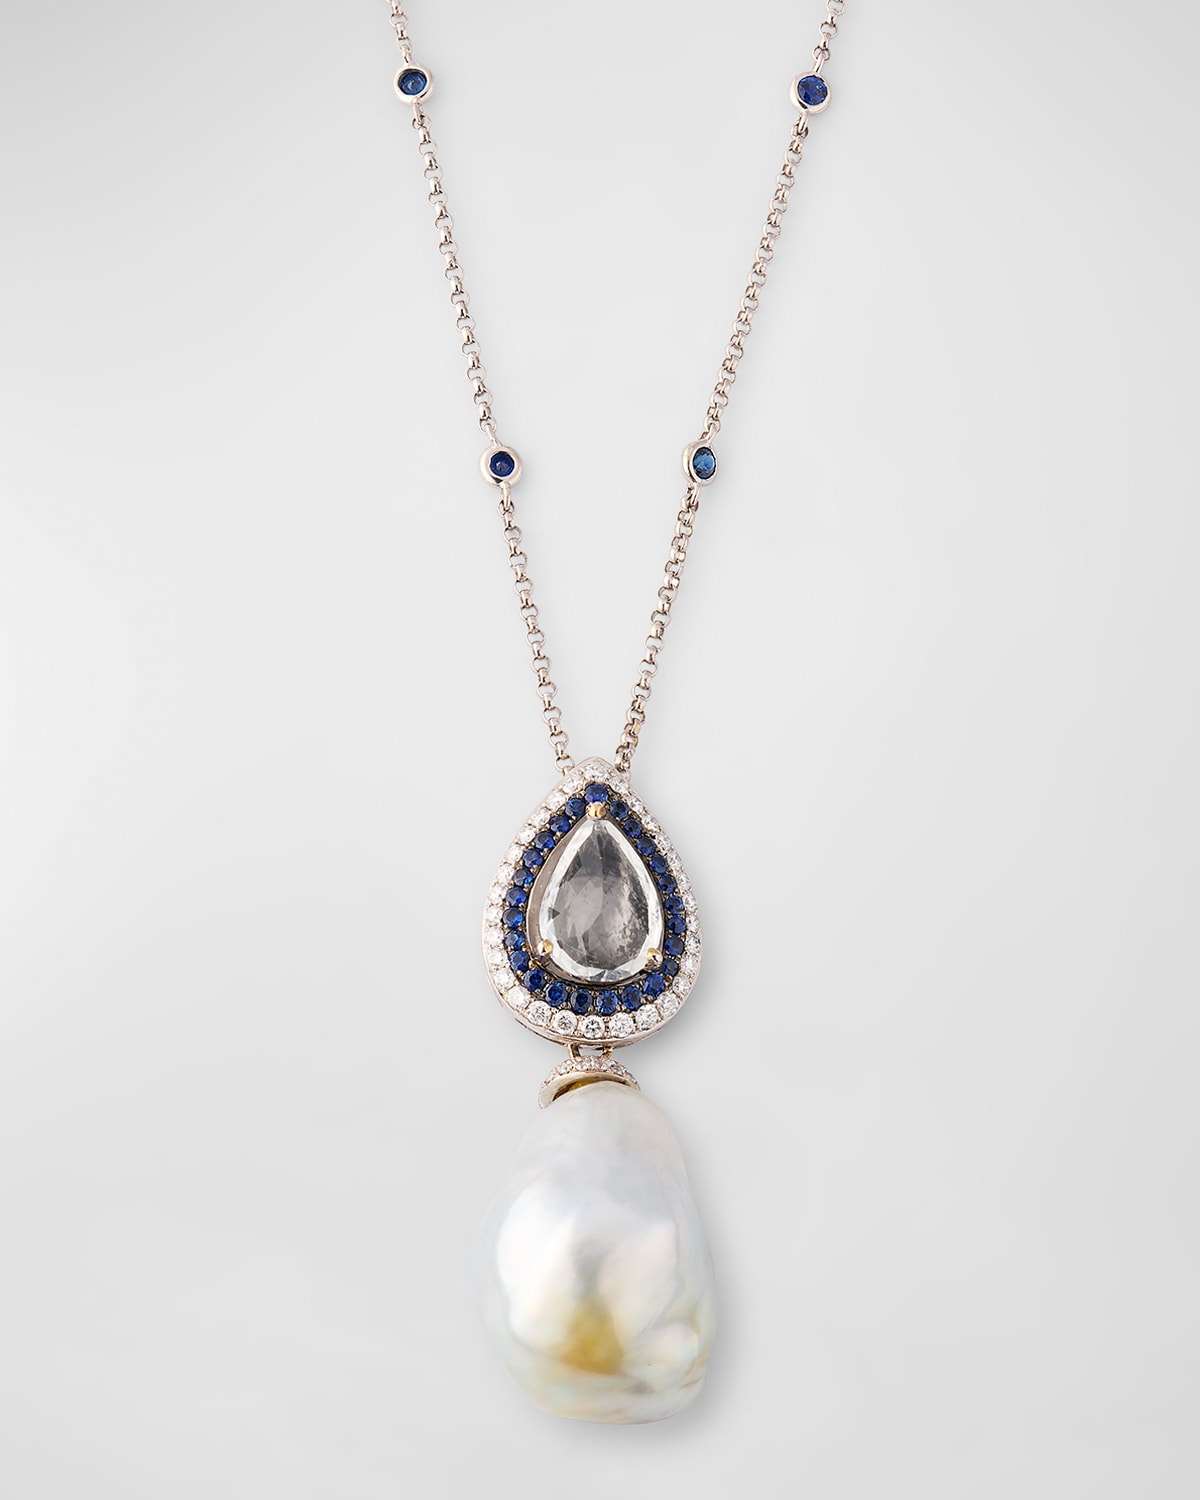 18K White Gold Moonstone, Sapphire and Diamond Necklace with Pearl Pendant, 18"L